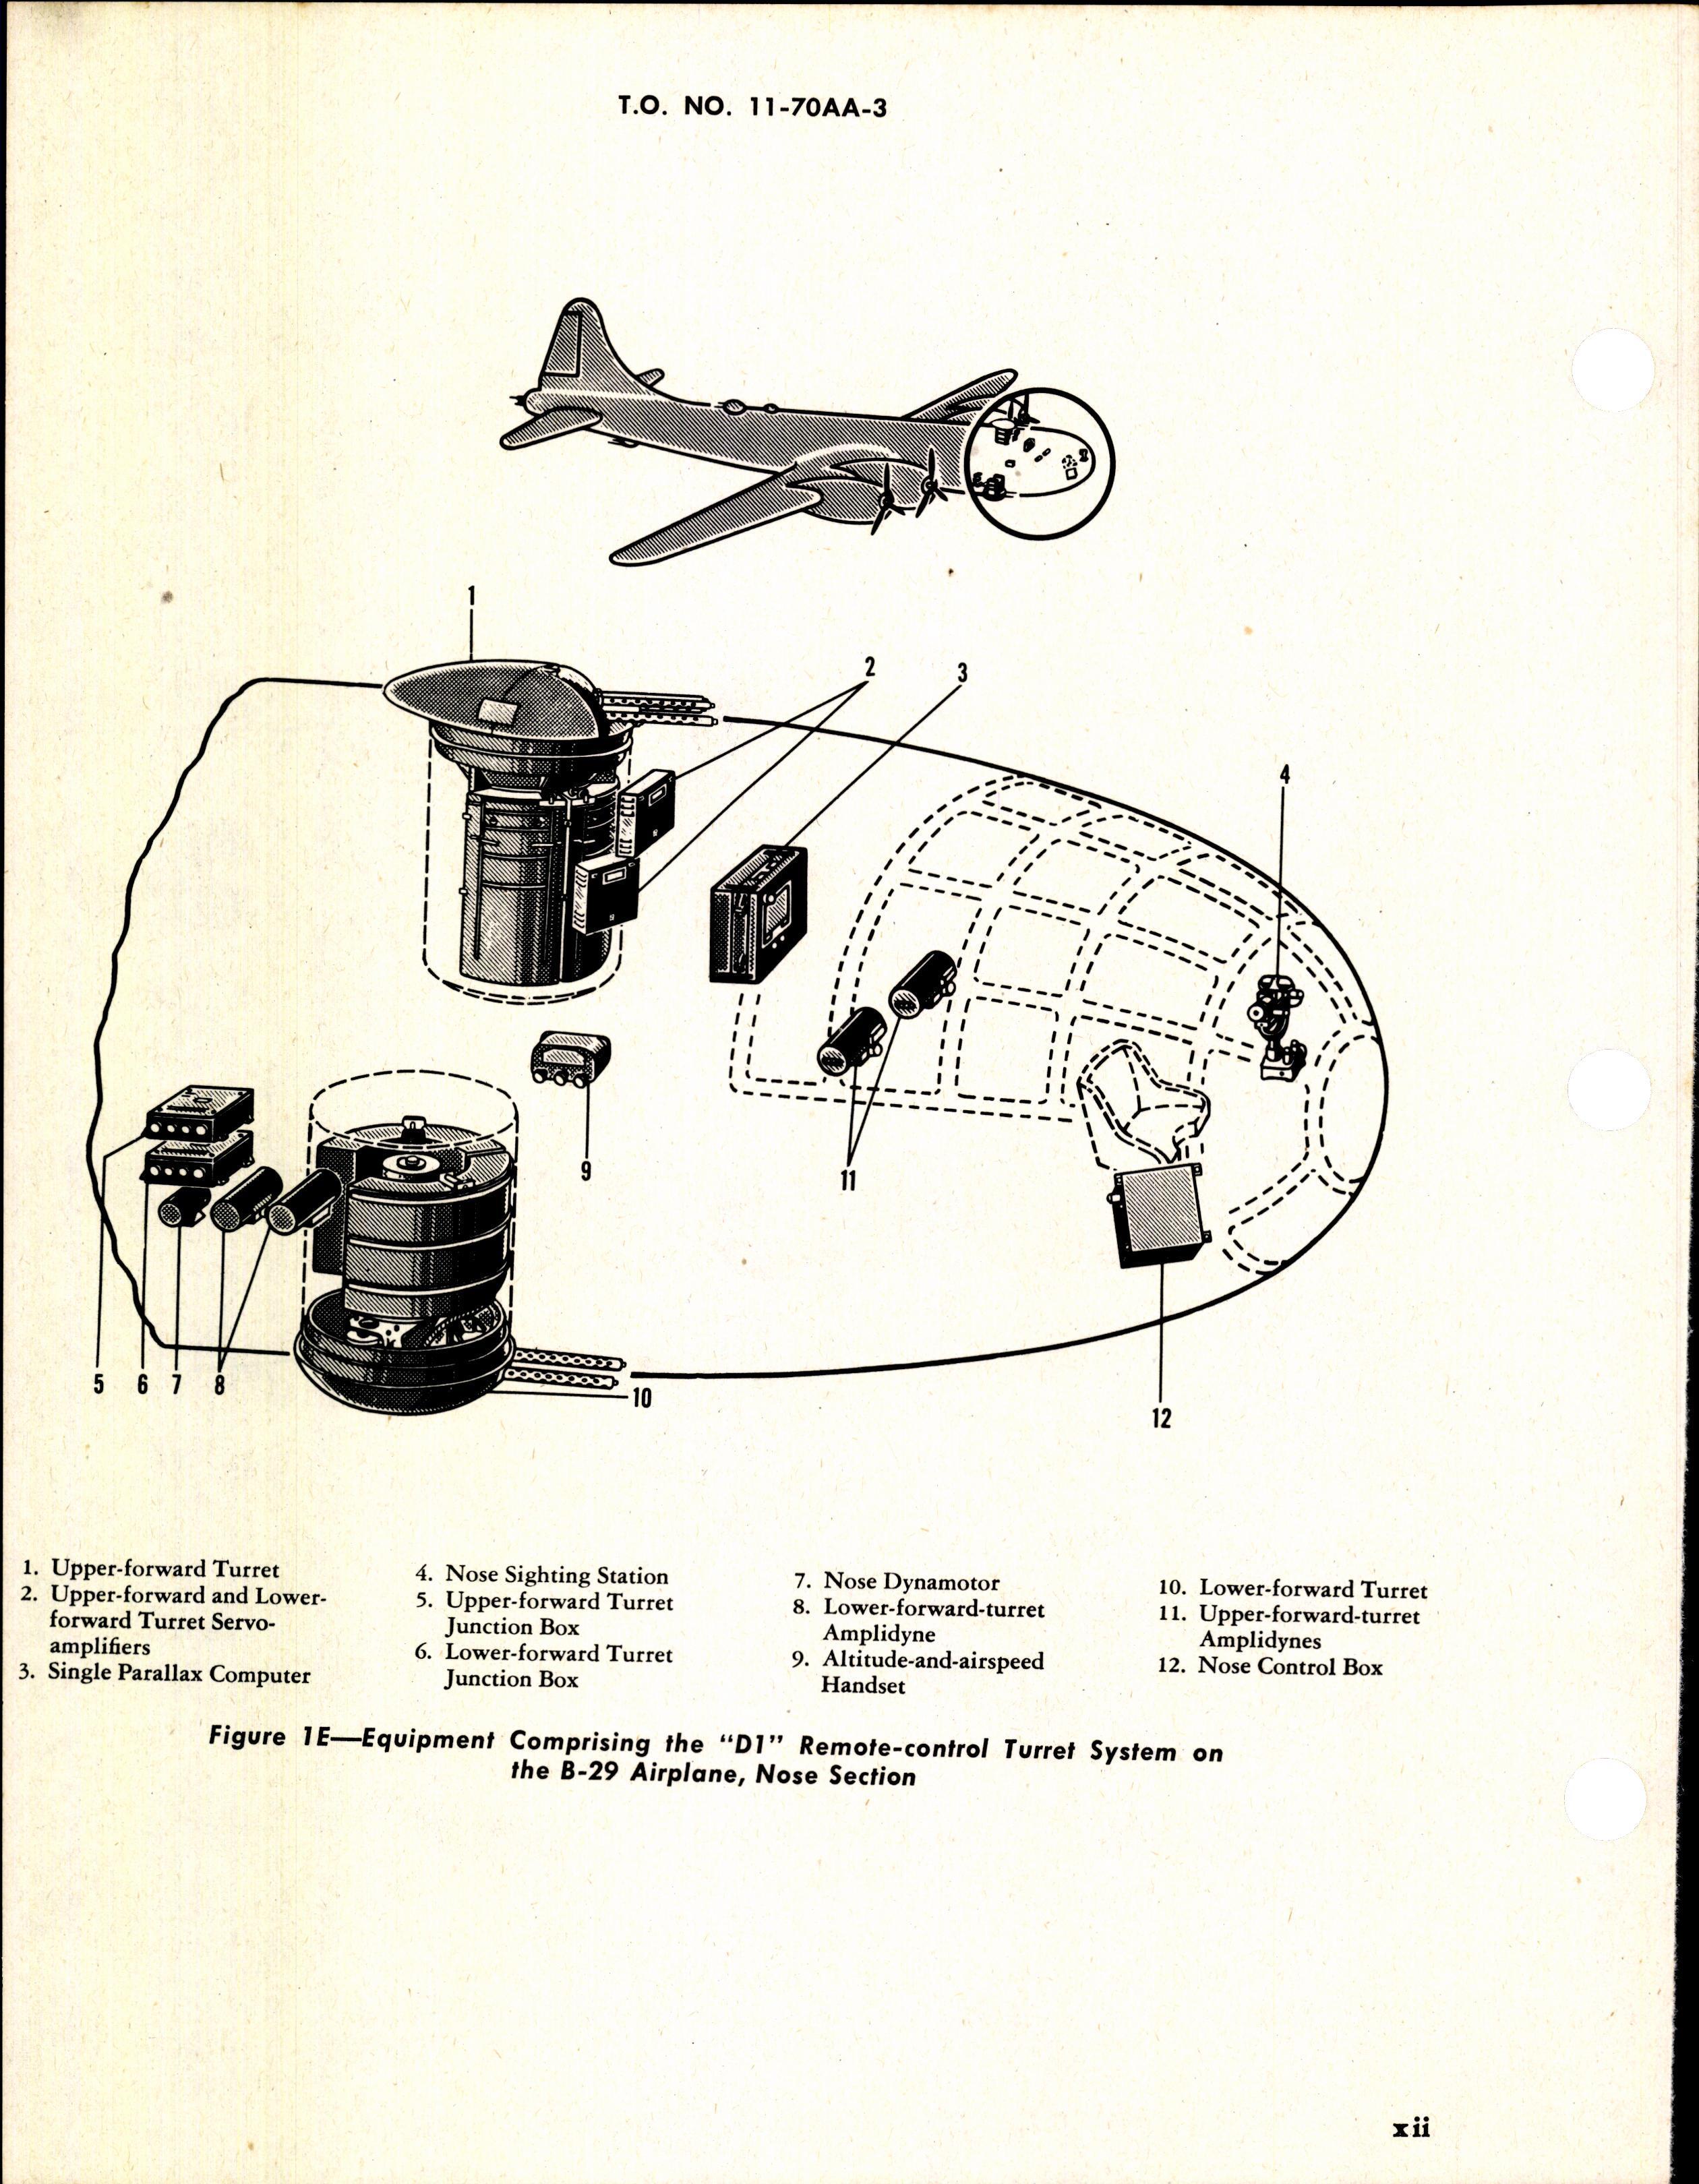 Sample page 14 from AirCorps Library document: Overhaul Instructions for Remote Controlled Turret Systems for B-29 Aircraft